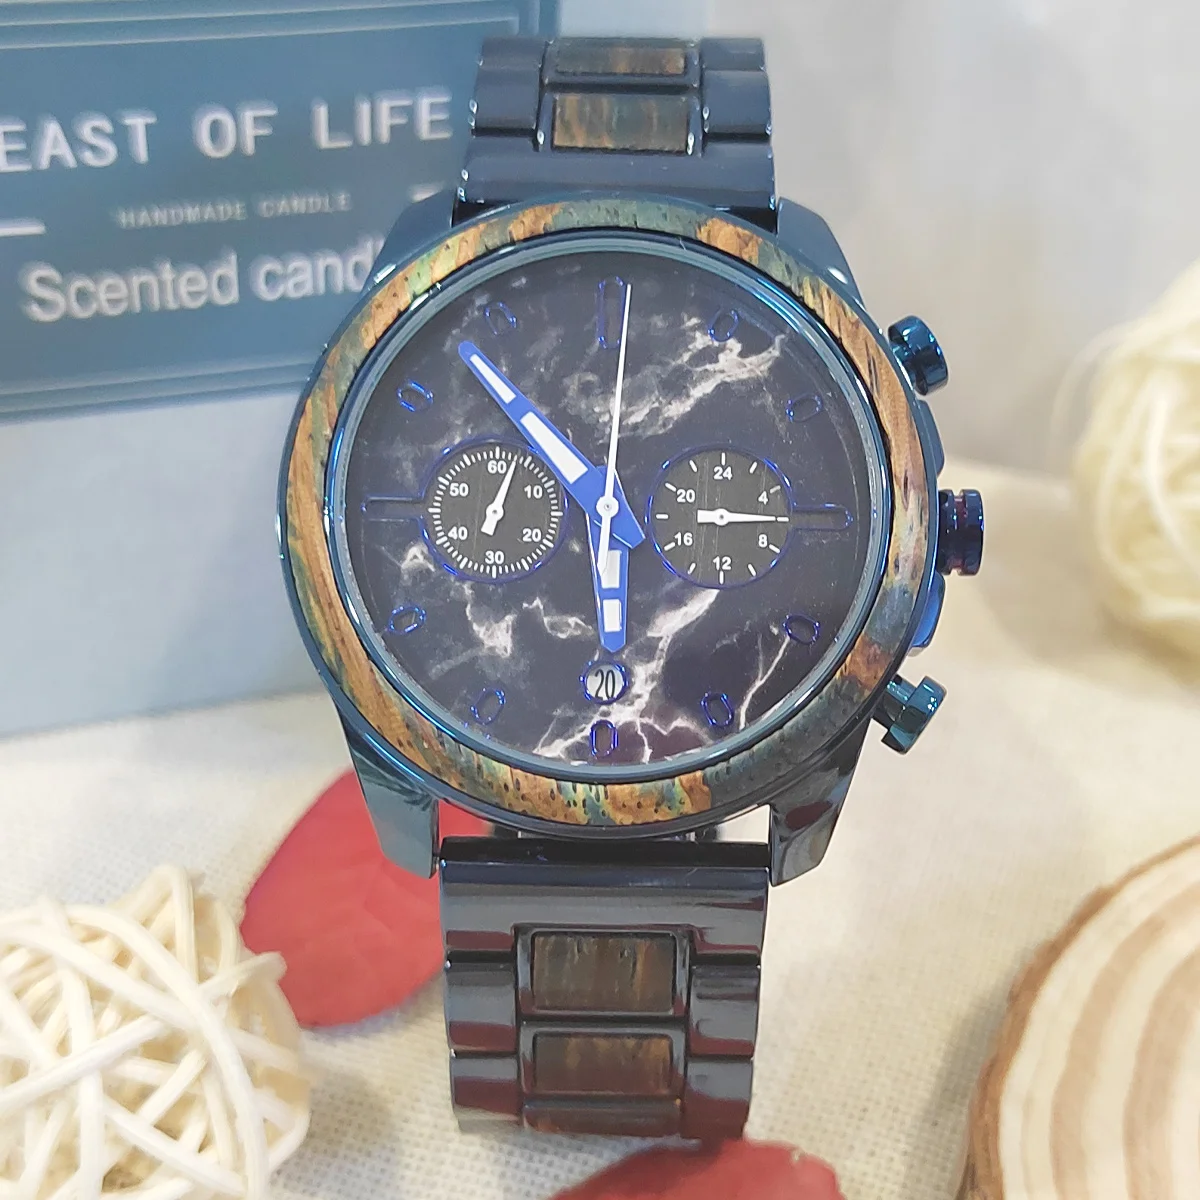 

Wooden Wrist Watch For Men with Free Shipping Timepieces Chronograph Clock Engraved Wood Wacthes Box for Him Gifts Dropshipping